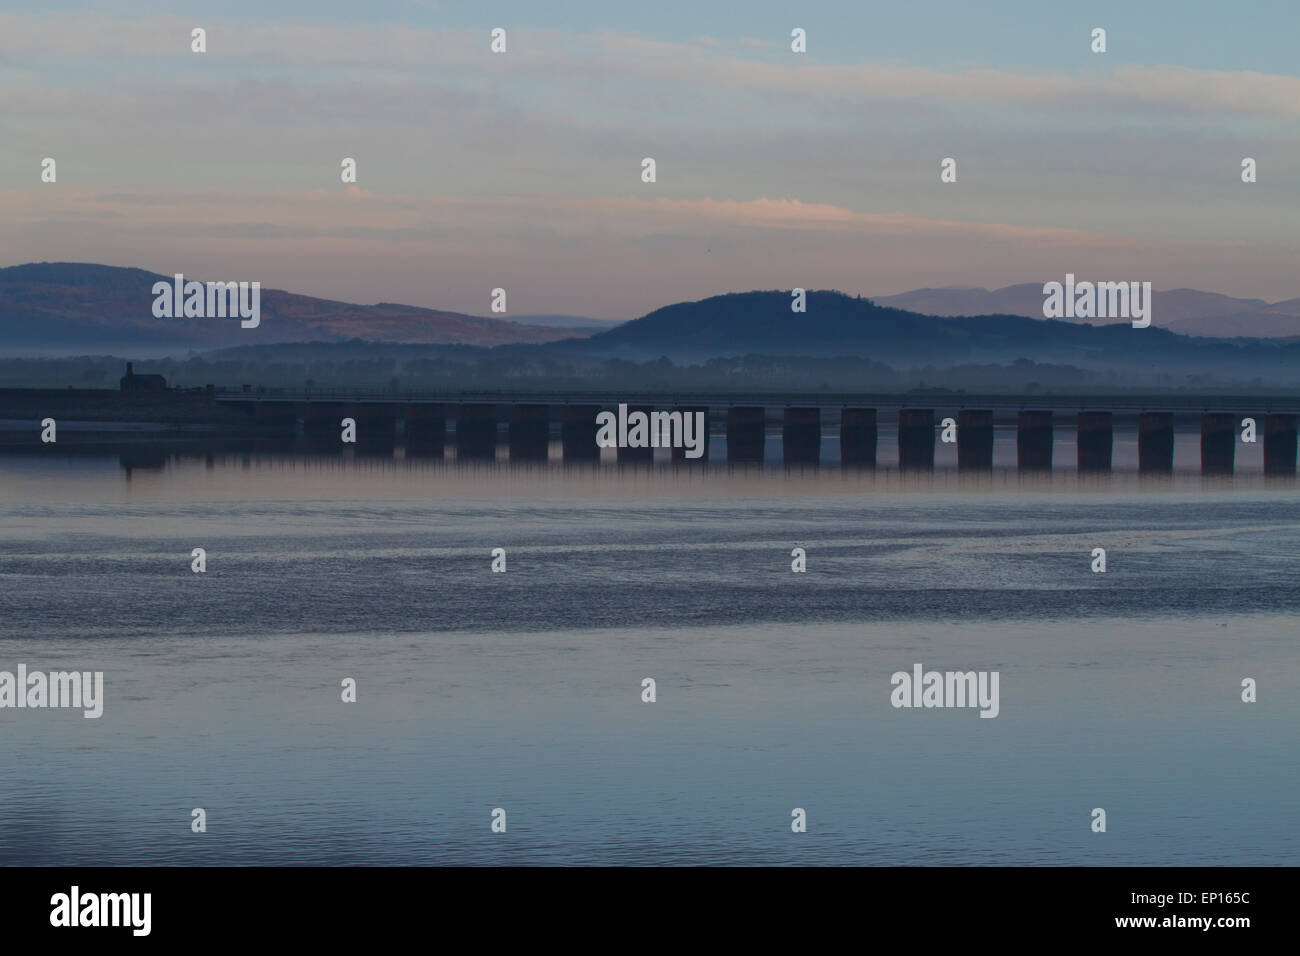 View across the Kent estuary to the viaduct in early morning. From Arnside, Cumbria, England. November. Stock Photo